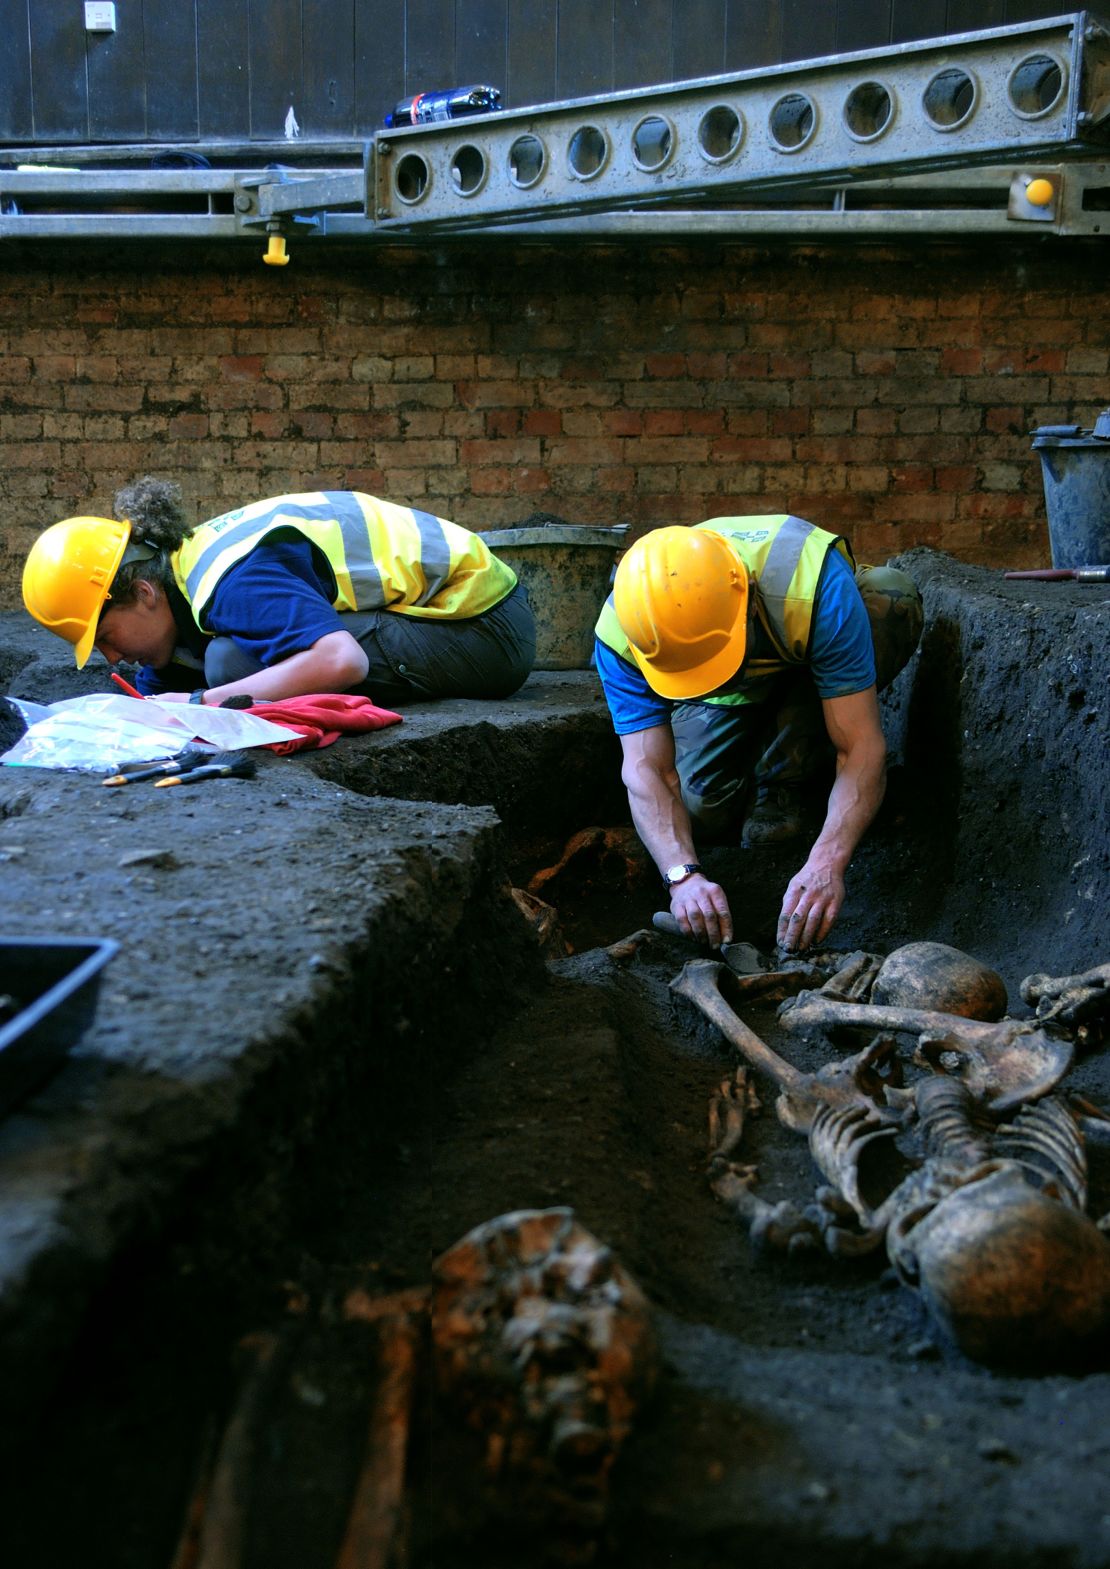 Members of the Cambridge Archaeological Unit at work on the excavation of the Hospital of St. John the Evangelist in 2010.  
Credit: Cambridge Archaeological Unit